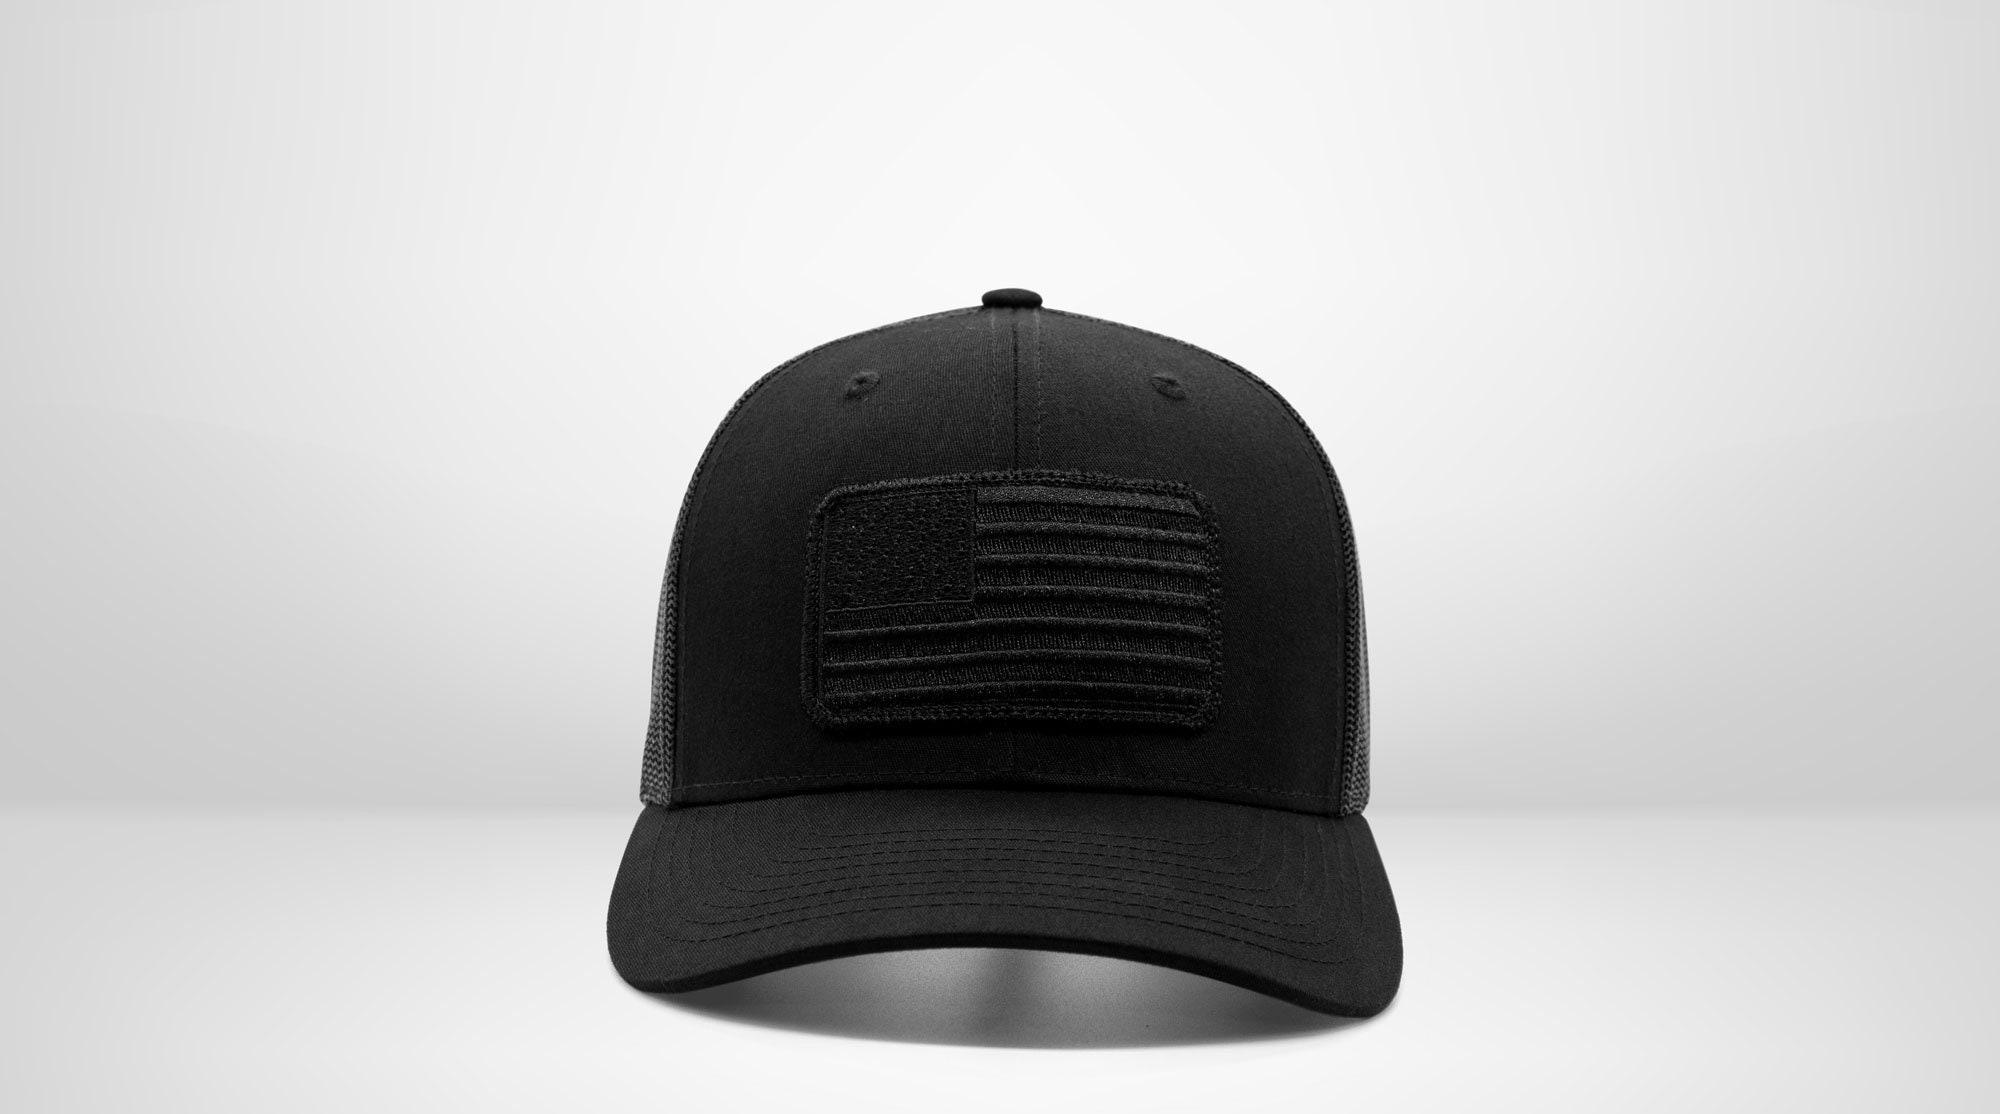 Let's Go Brandon All Black American Flag Patch Sewn on Classic Trucker